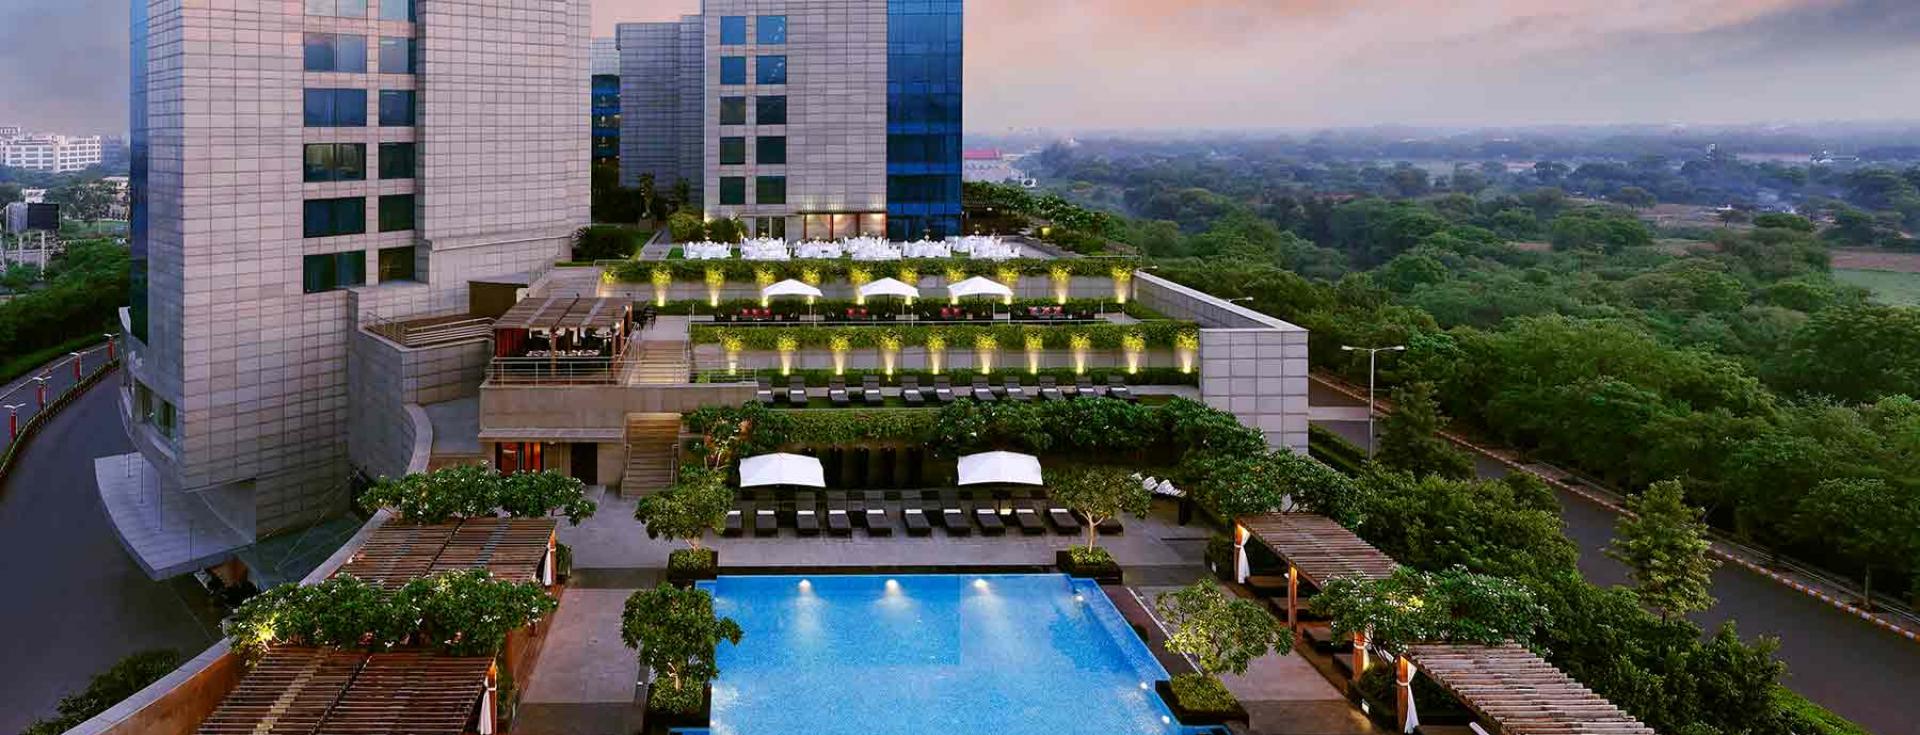 Why you should book The Leela Ambience Gurugram Hotel & Residences for your next business meet